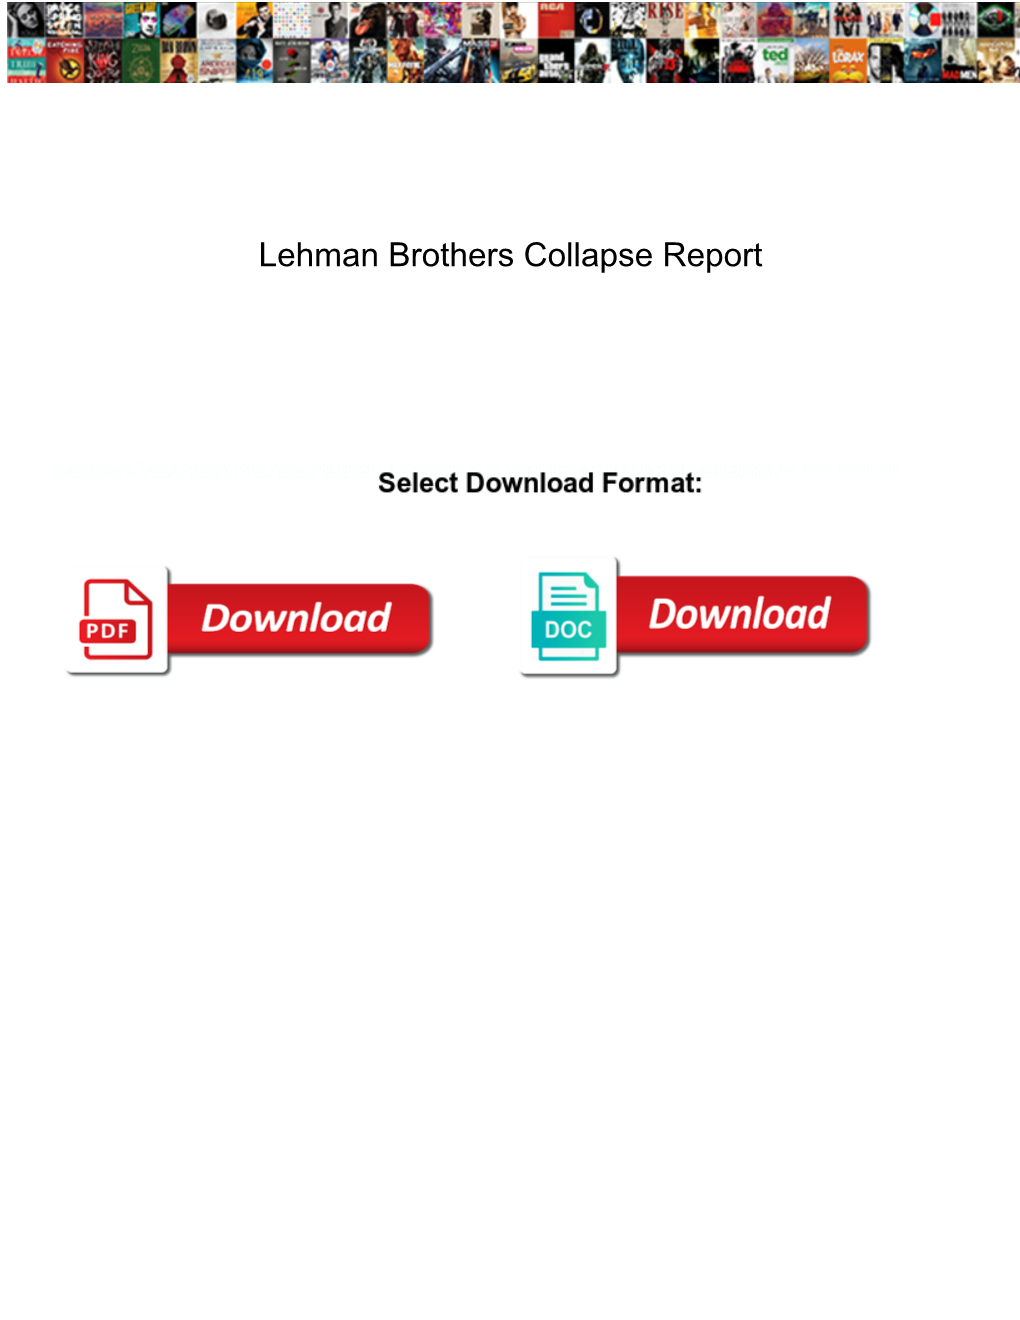 Lehman Brothers Collapse Report